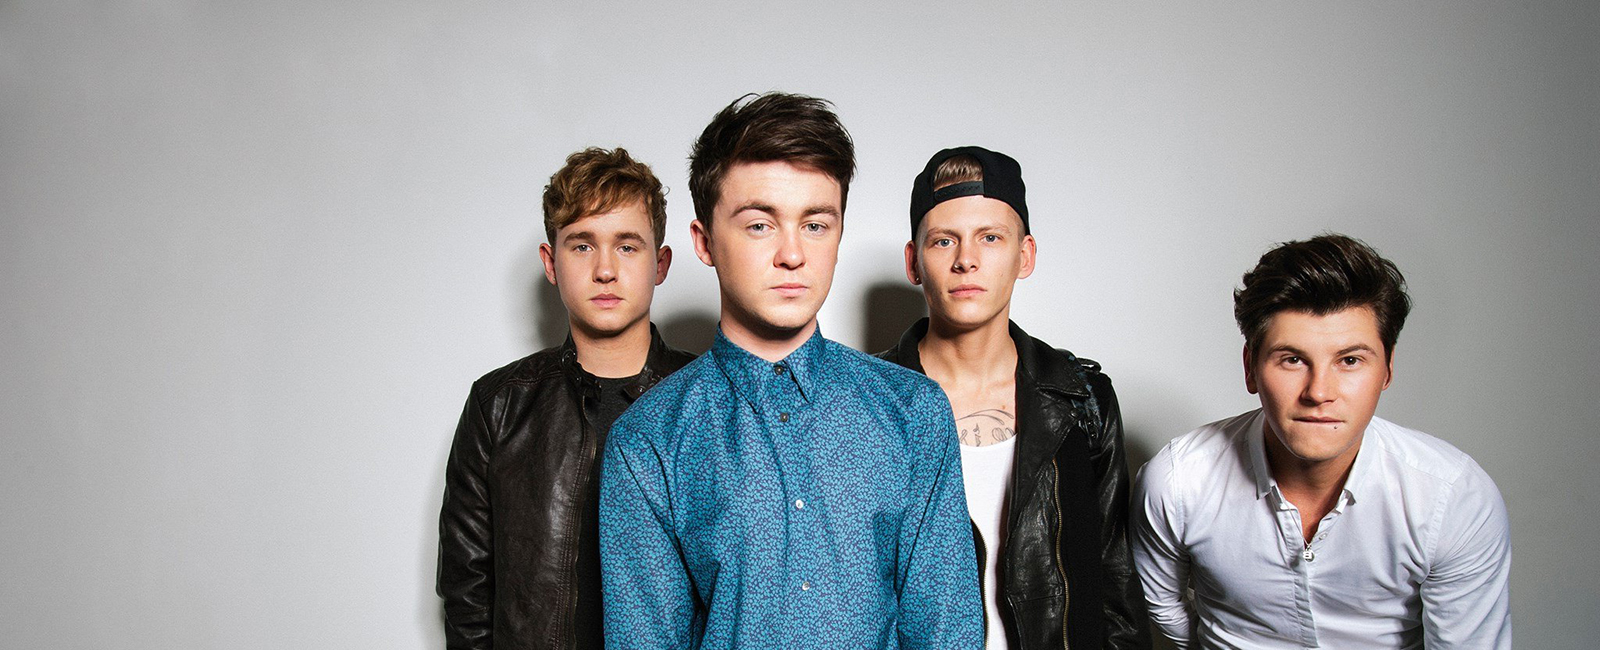 Rixton – Me and My Broken Heart